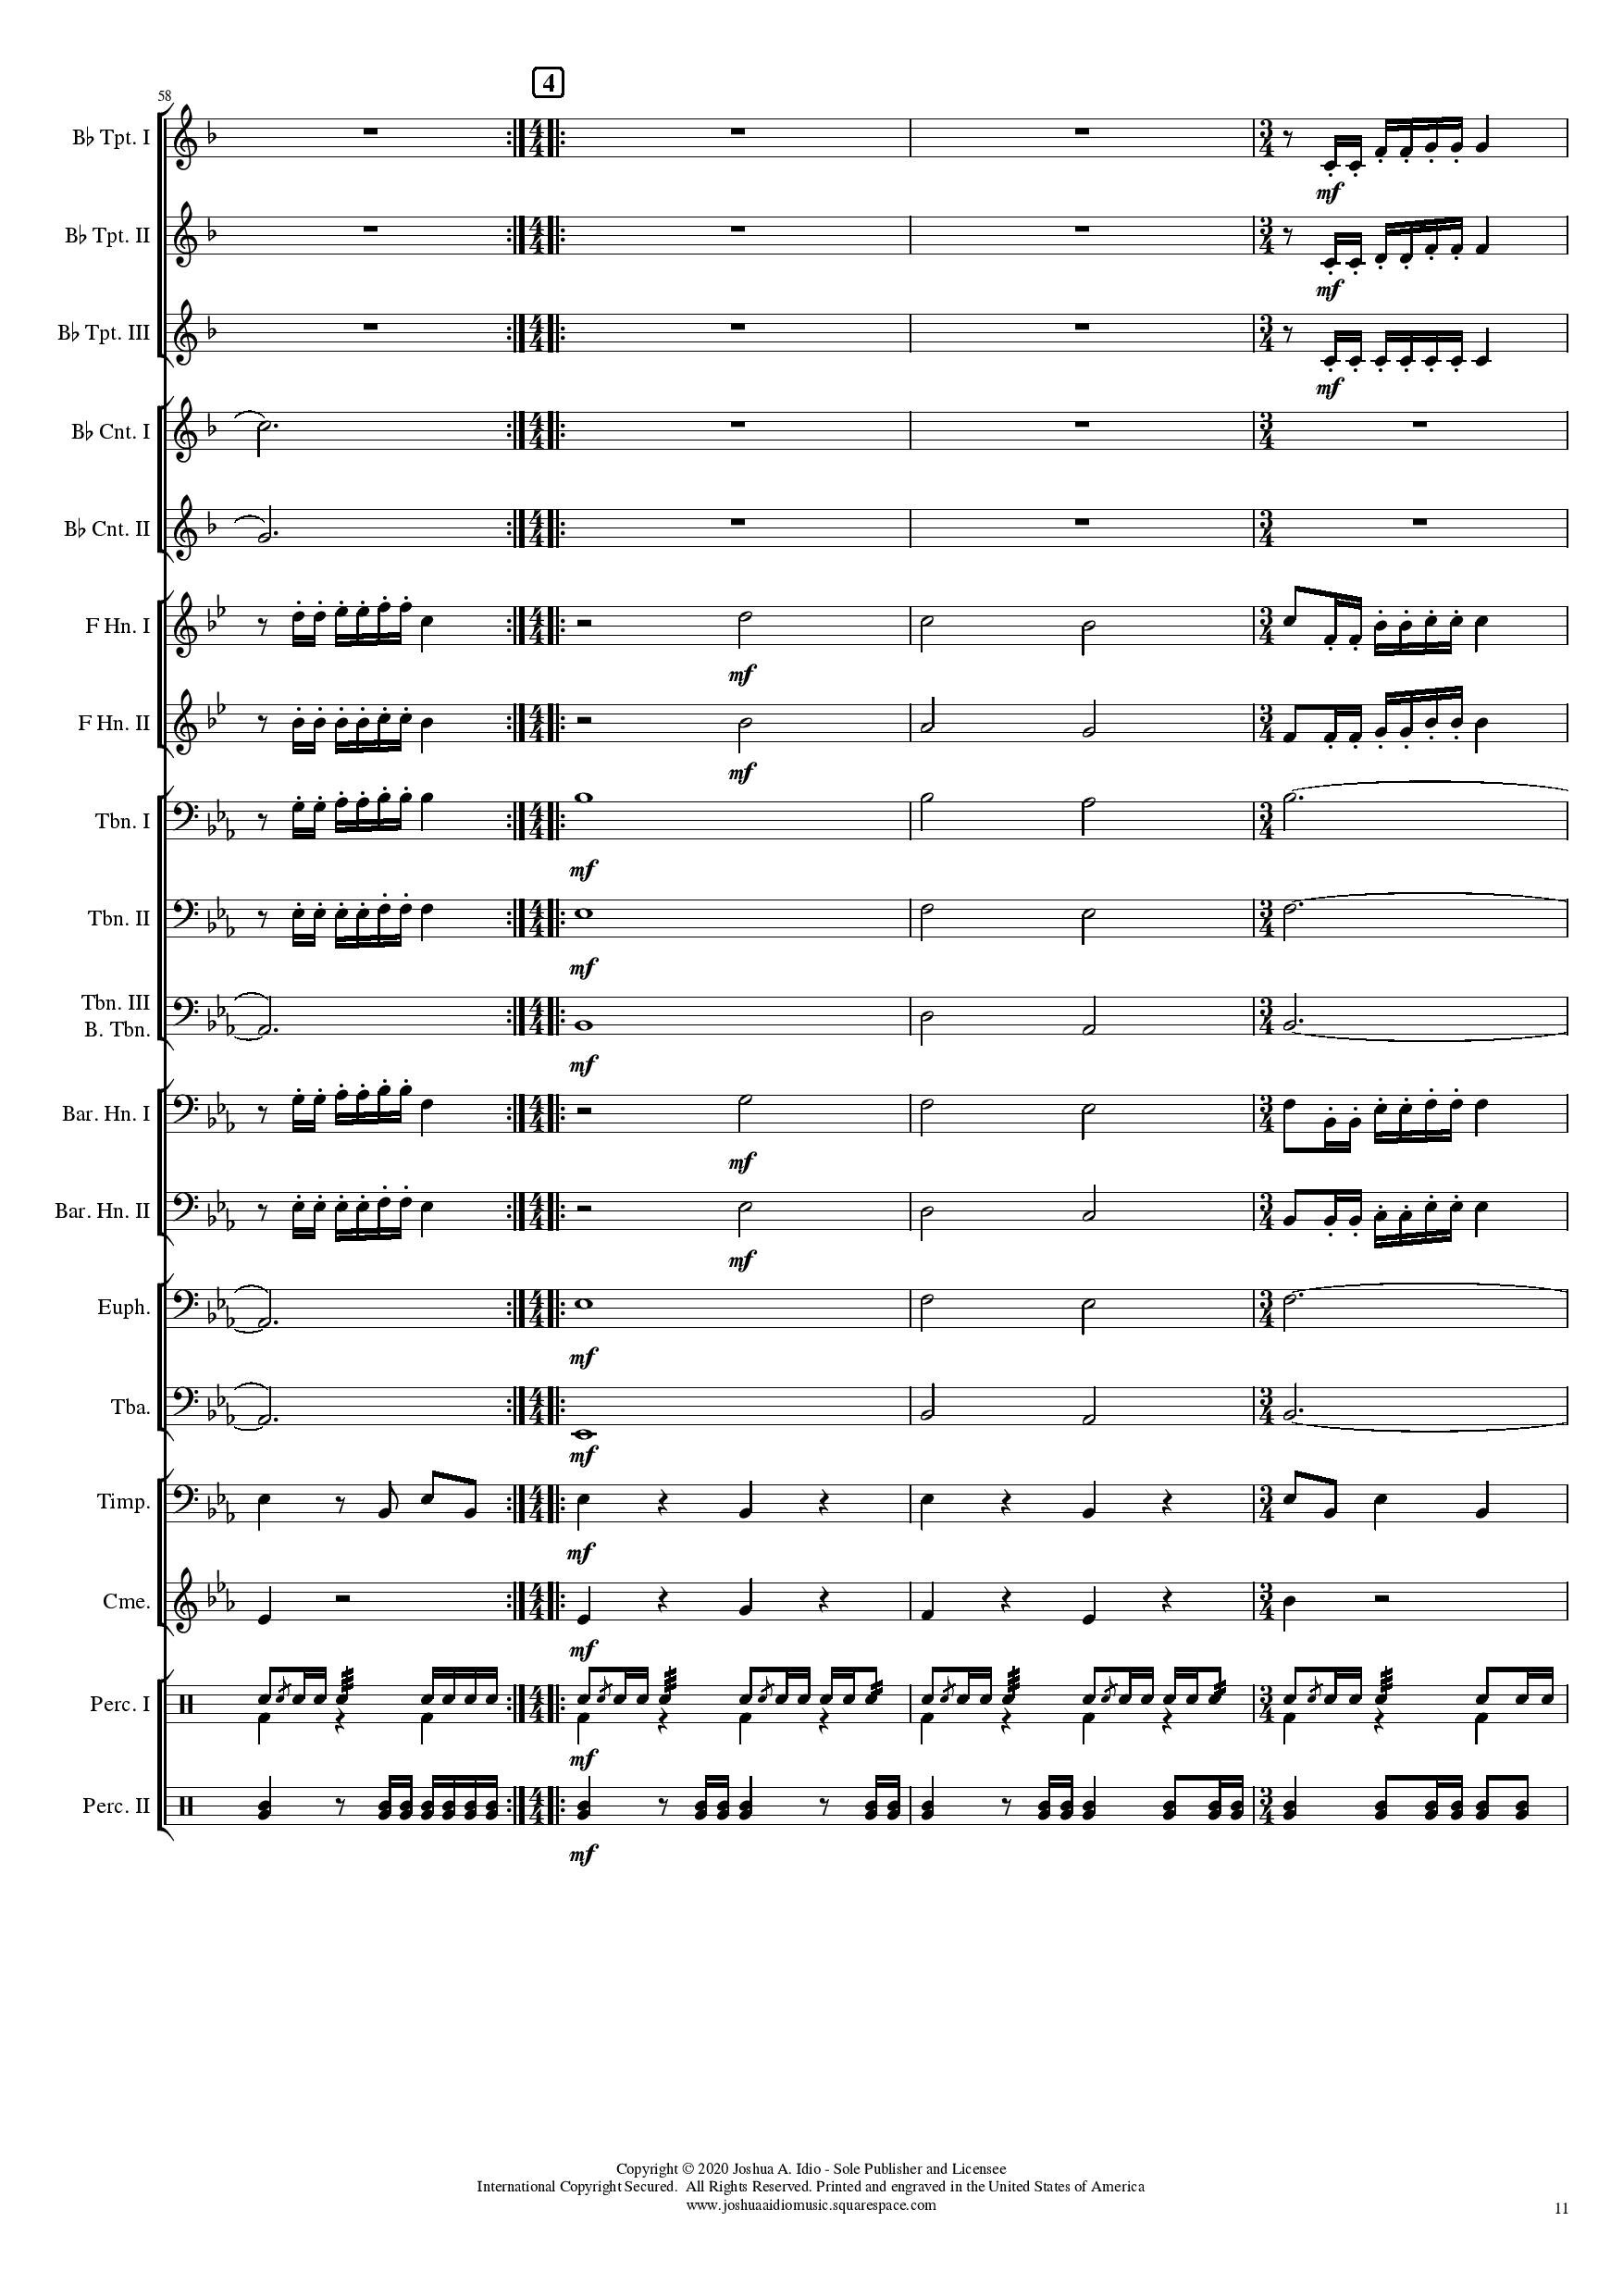 The Procession of Scholars - Conductor s Score-page-011.jpg